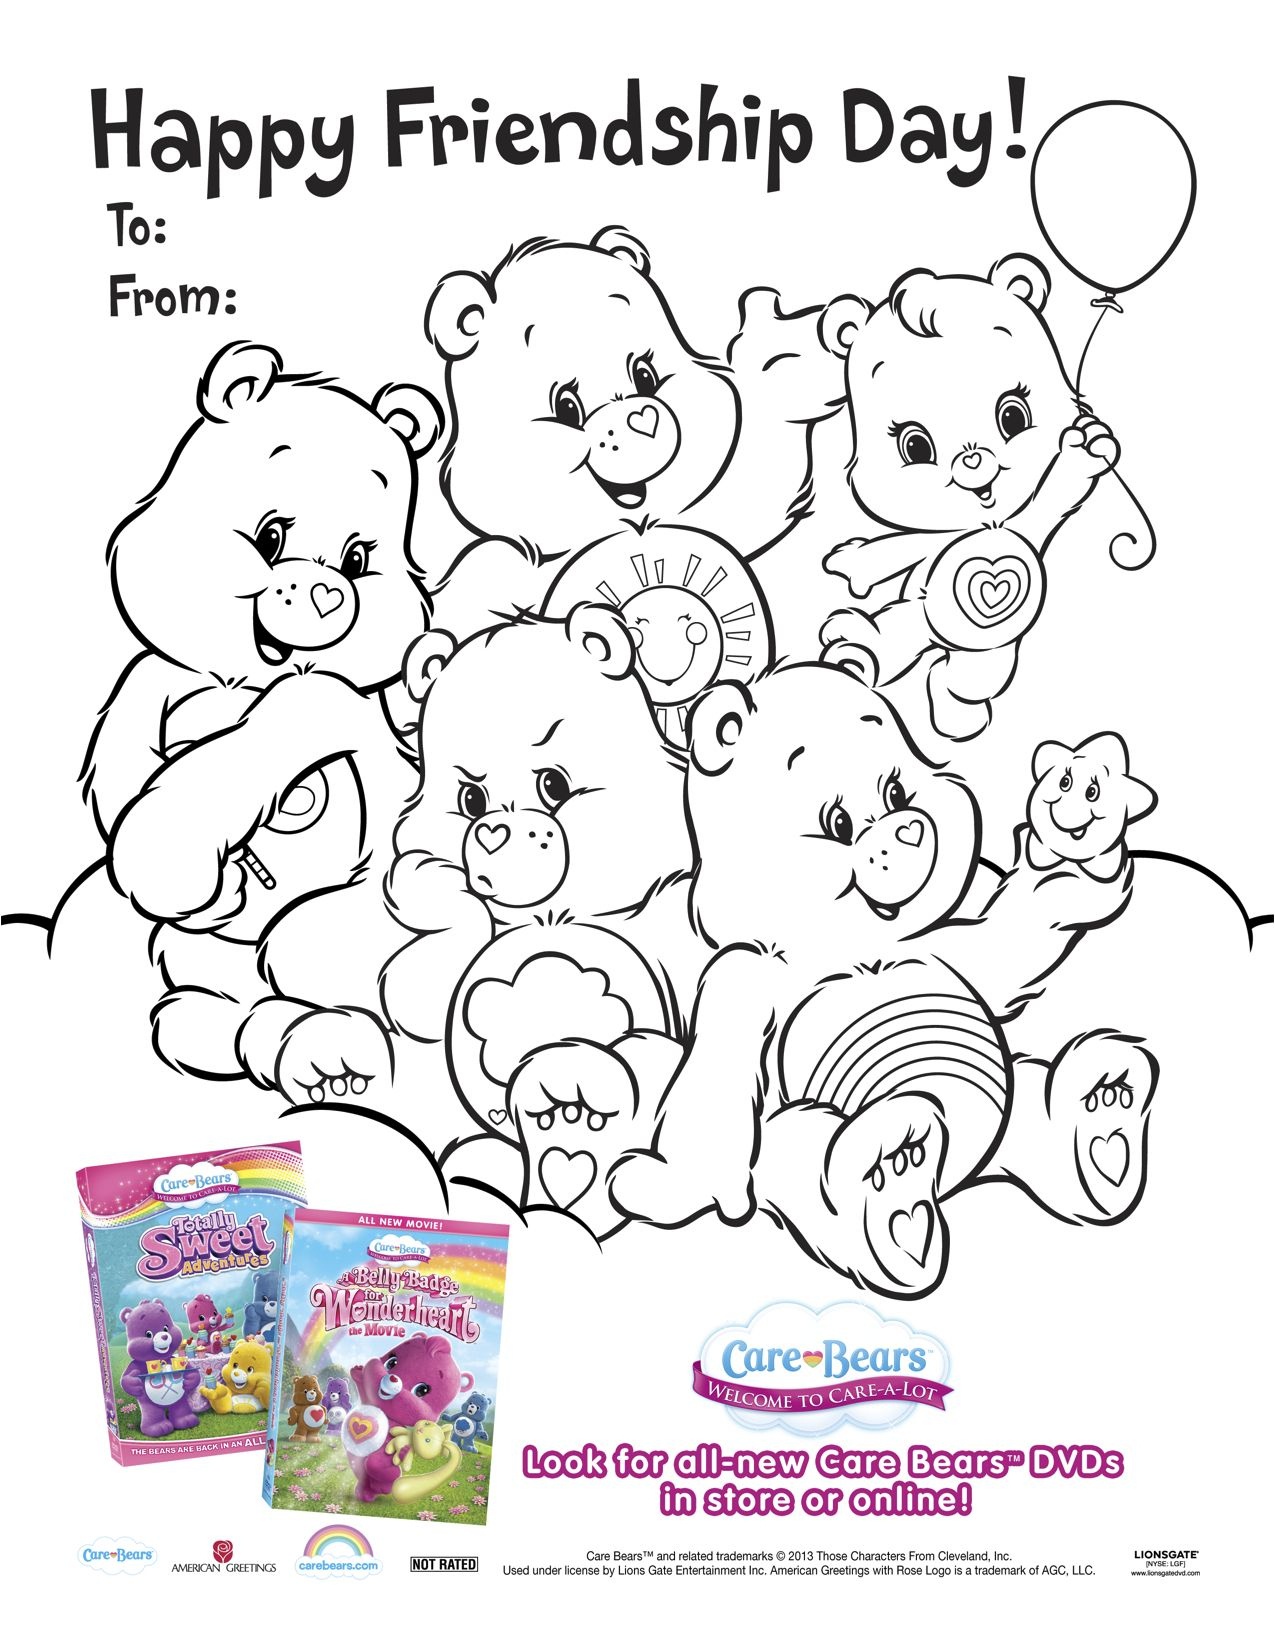 Care Bears Wonderheart Printable Friendship Day Coloring Page - Free Printable Bff Coloring Pages